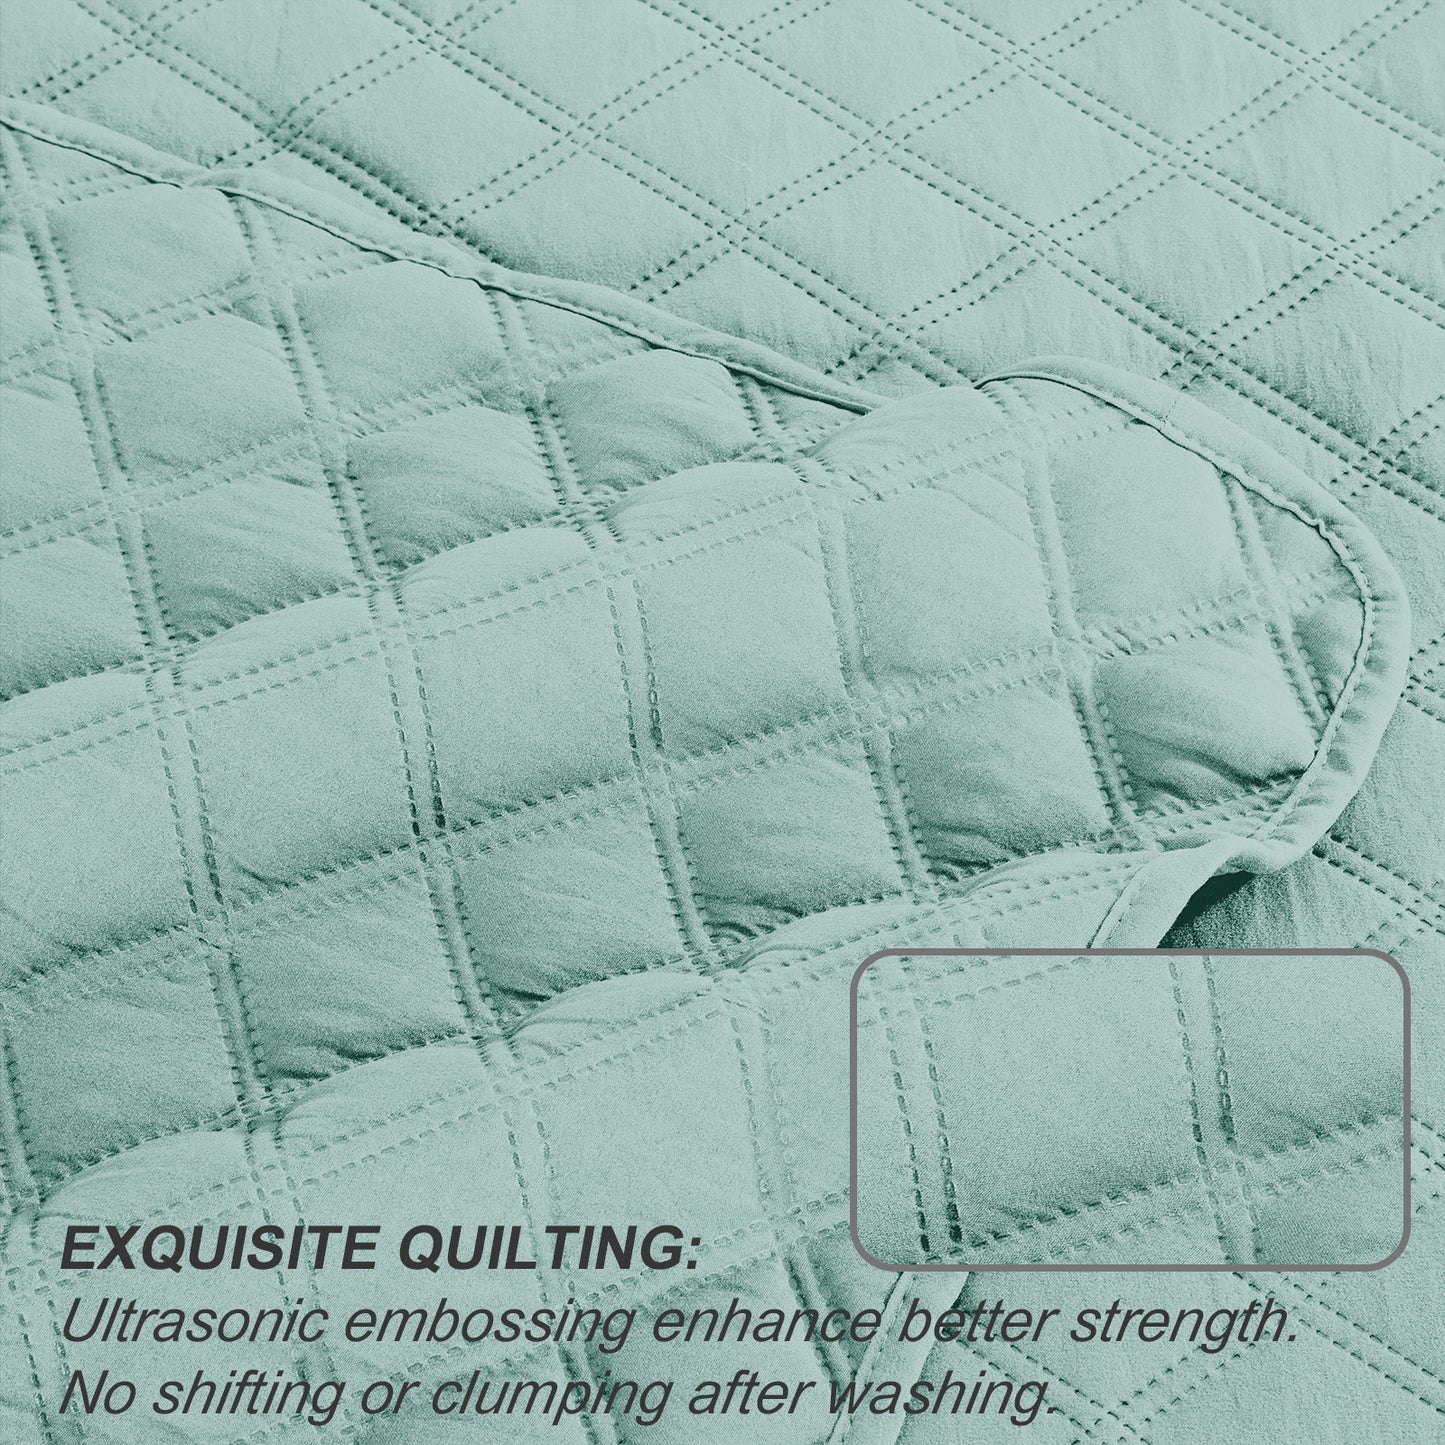 Exclusivo Mezcla 3-Piece Aqua King Size Quilt Set, Box Pattern Ultrasonic Lightweight and Soft Quilts/Bedspreads/Coverlets/Bedding Set (1 Quilt, 2 Pillow Shams) for All Seasons